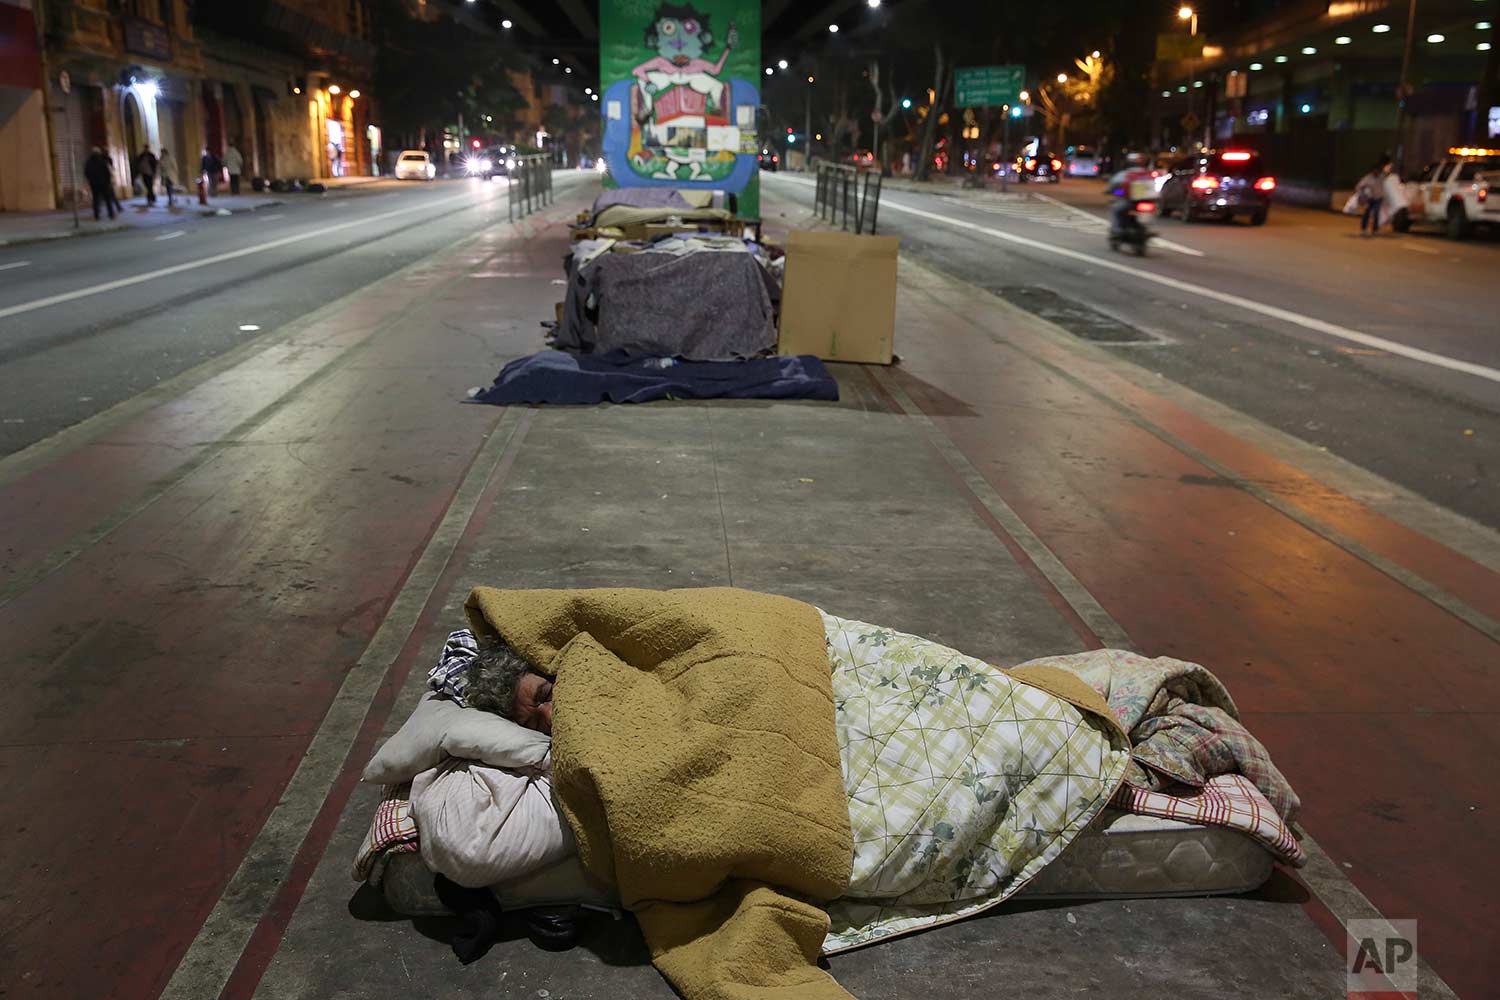 A homeless person sleeps on the sidewalk during a cold night in downtown Sao Paulo, Brazil, Wednesday, July 19, 2017. (AP Photo/Andre Penner)